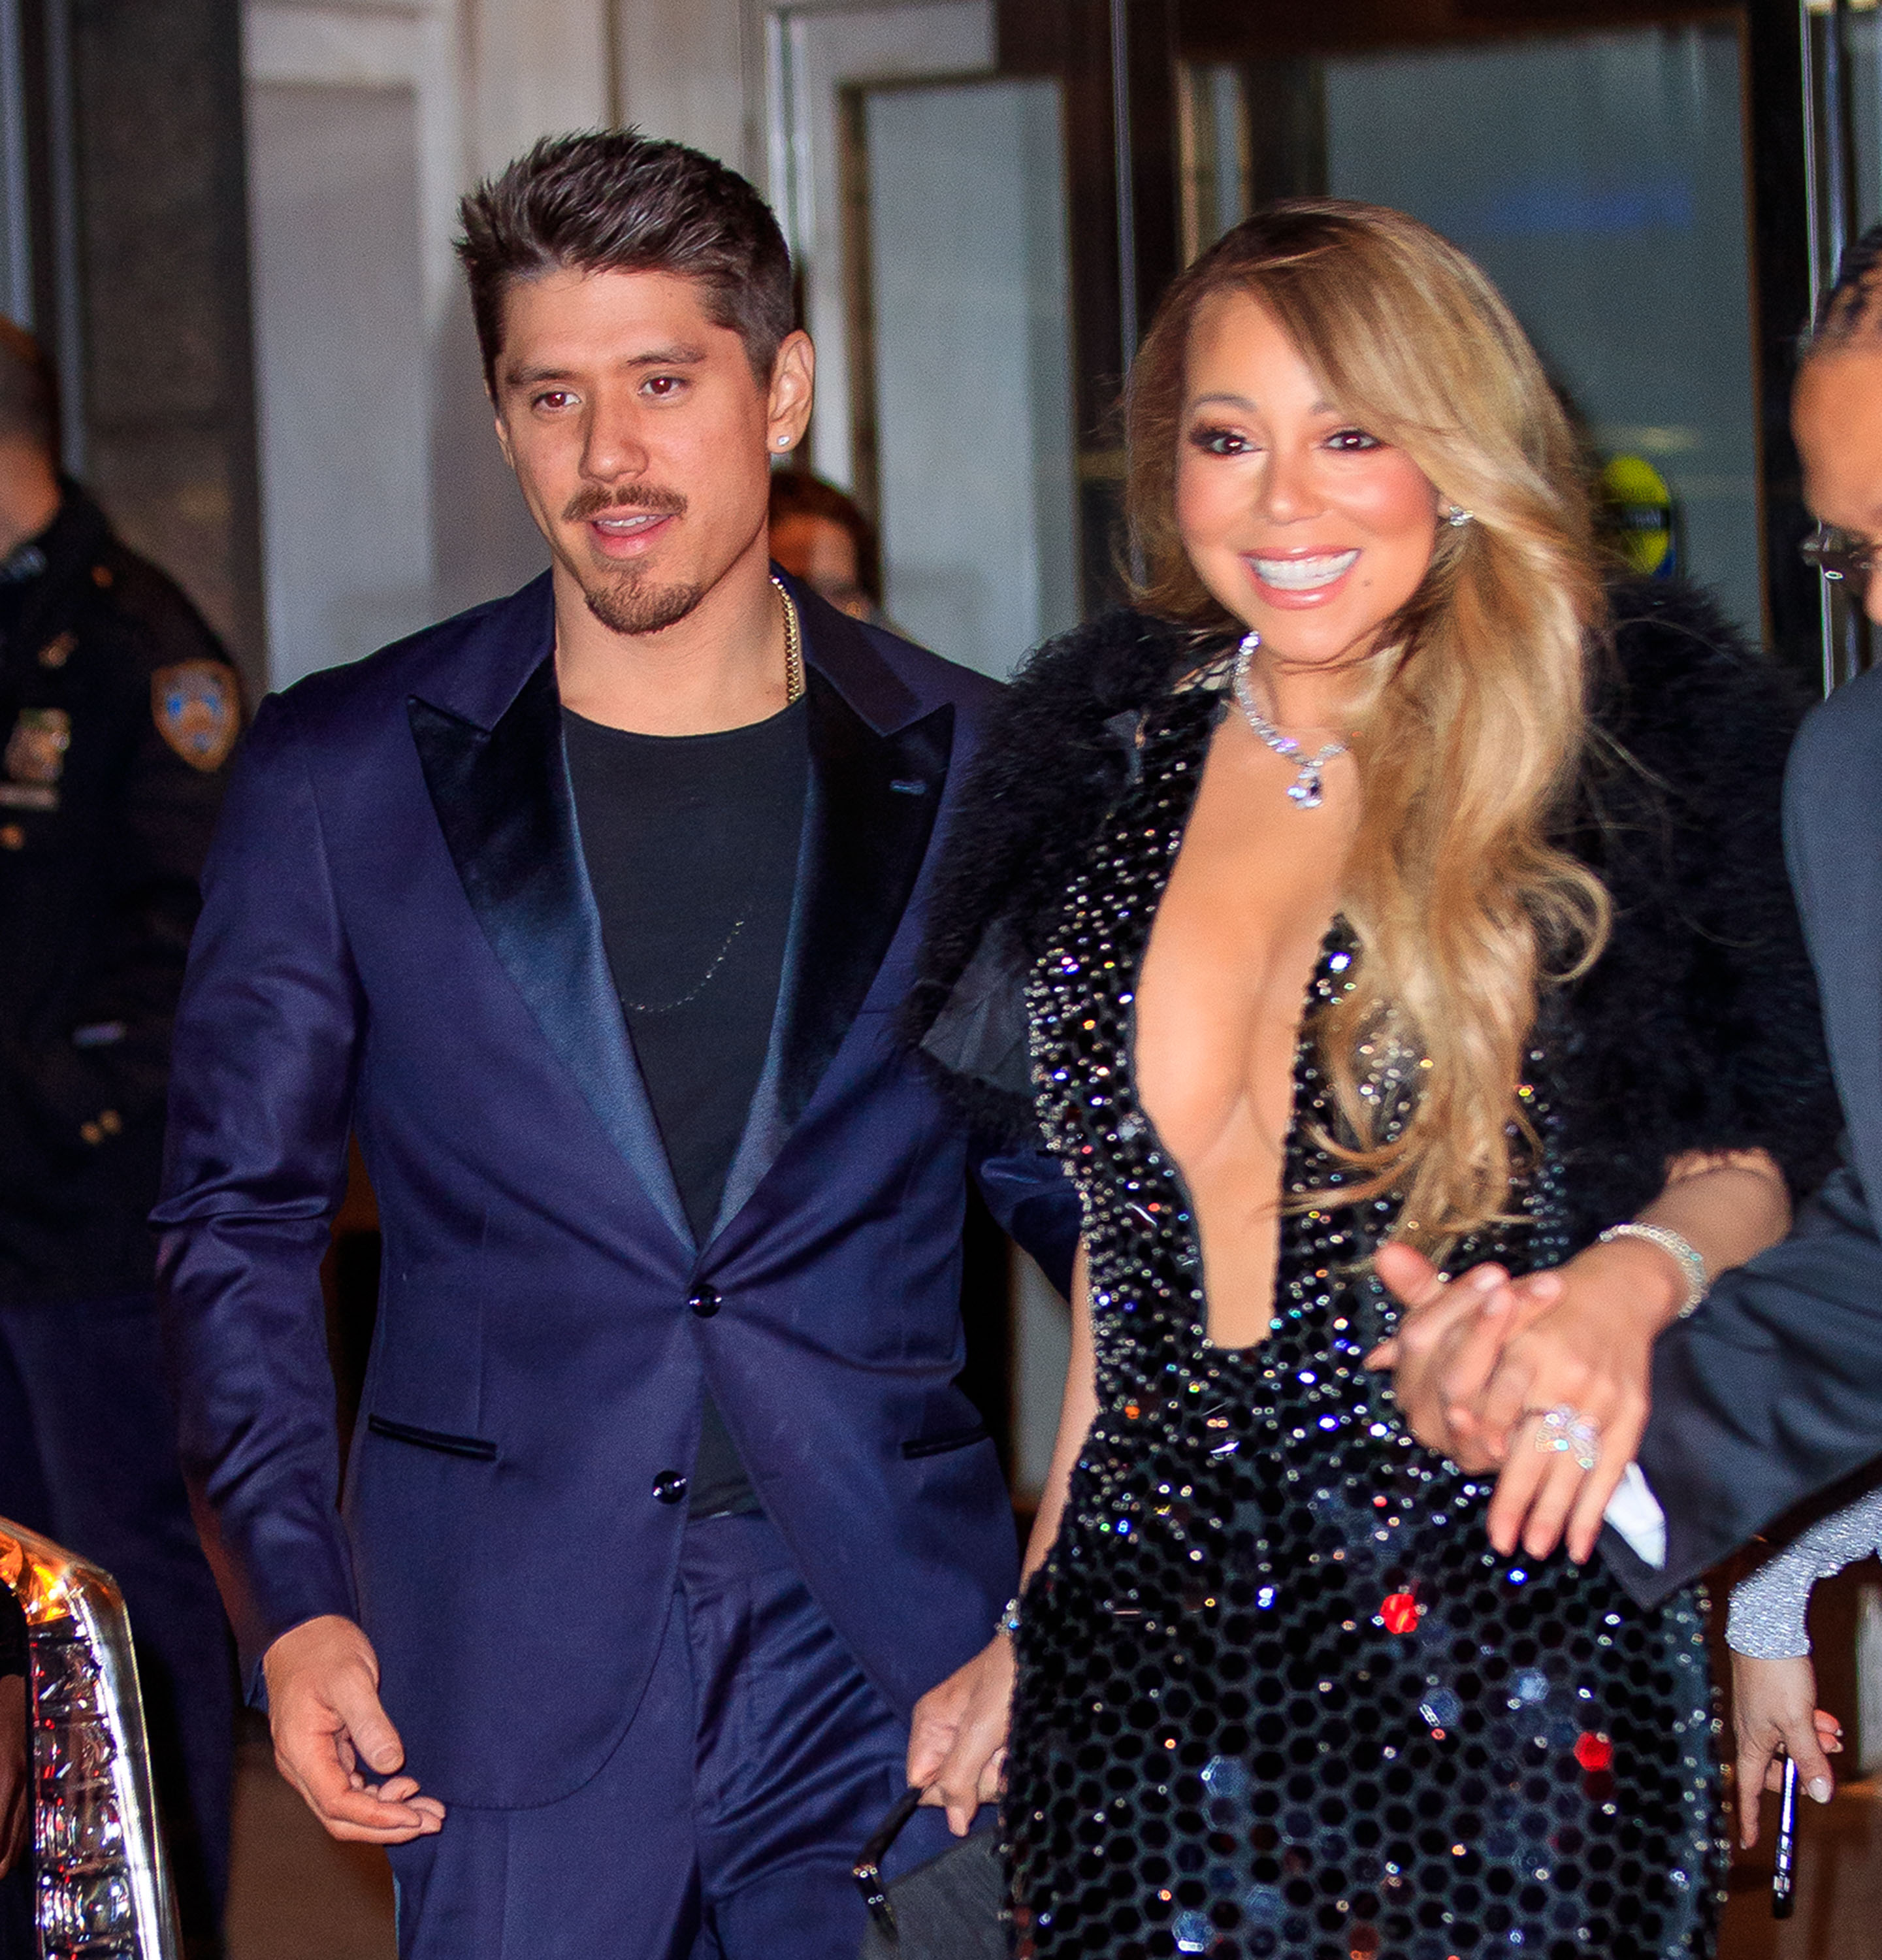 Mariah and Bryan split up after 7 years together